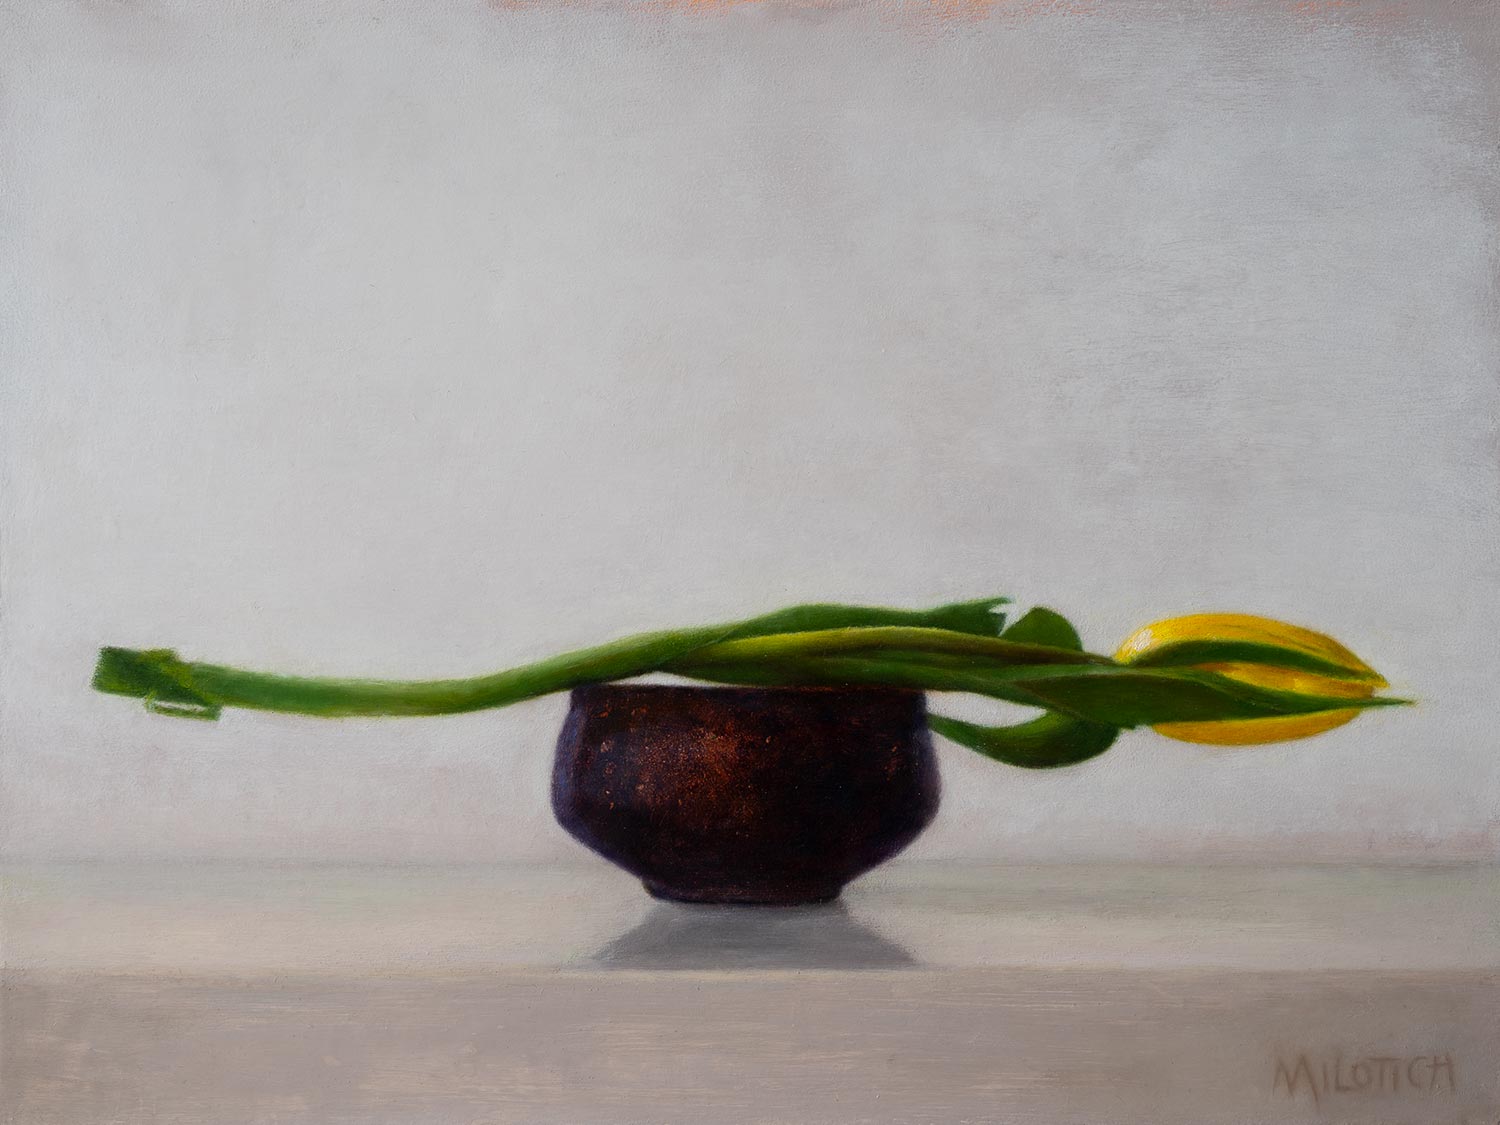 Yellow Tulip on Japanese Bowl, an original oil painting by Ute Milotich